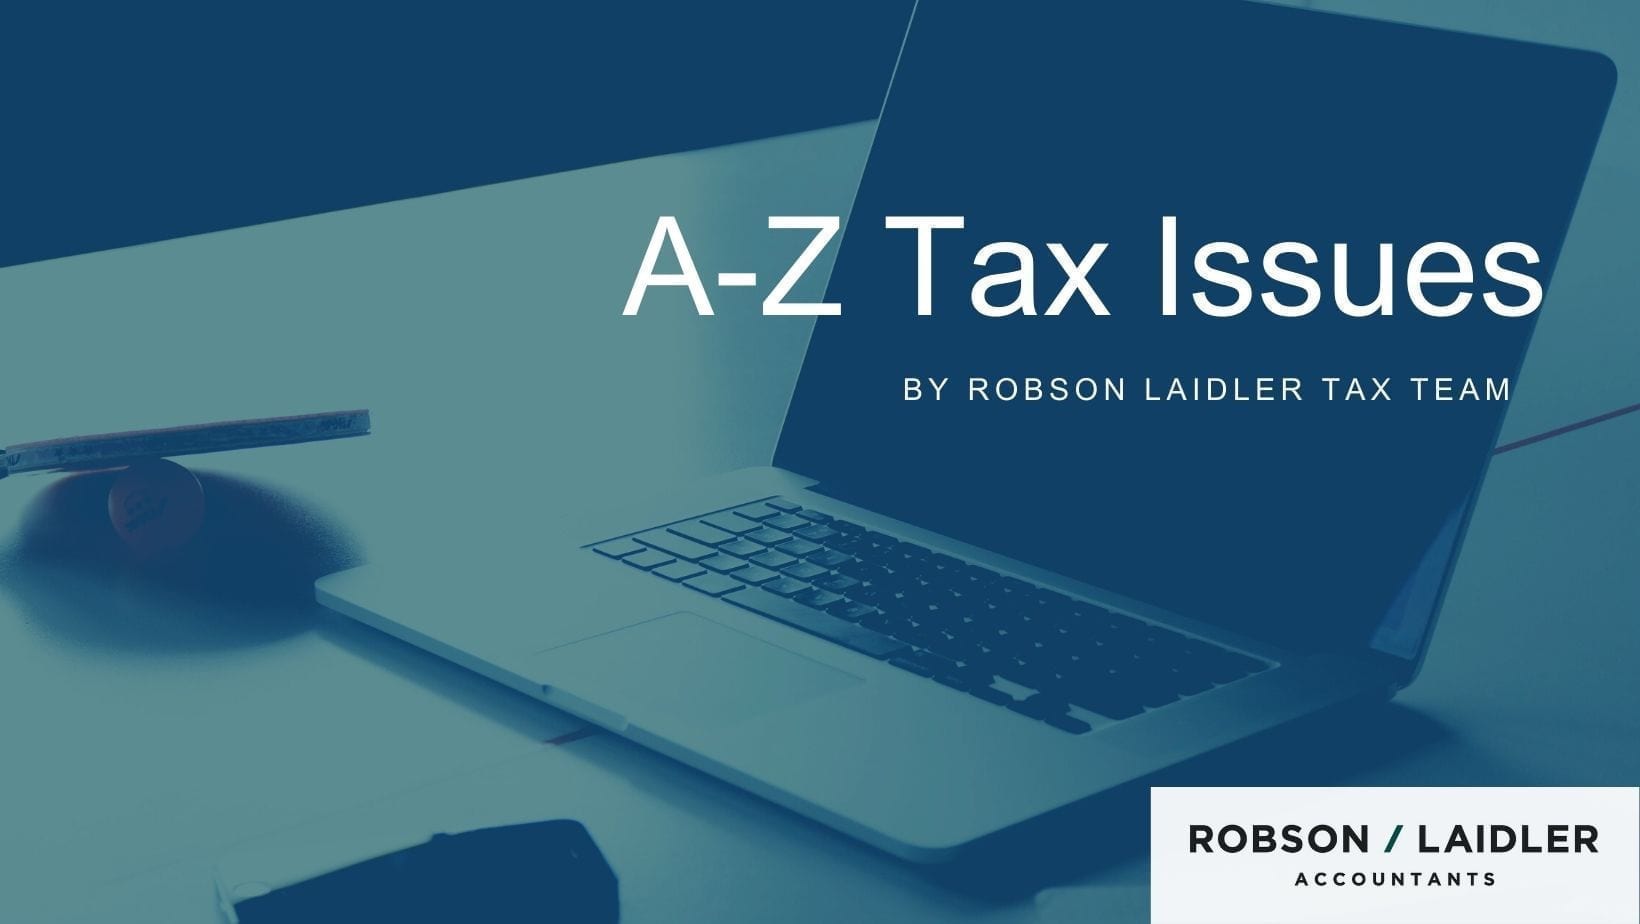 A-Z Tax Issues